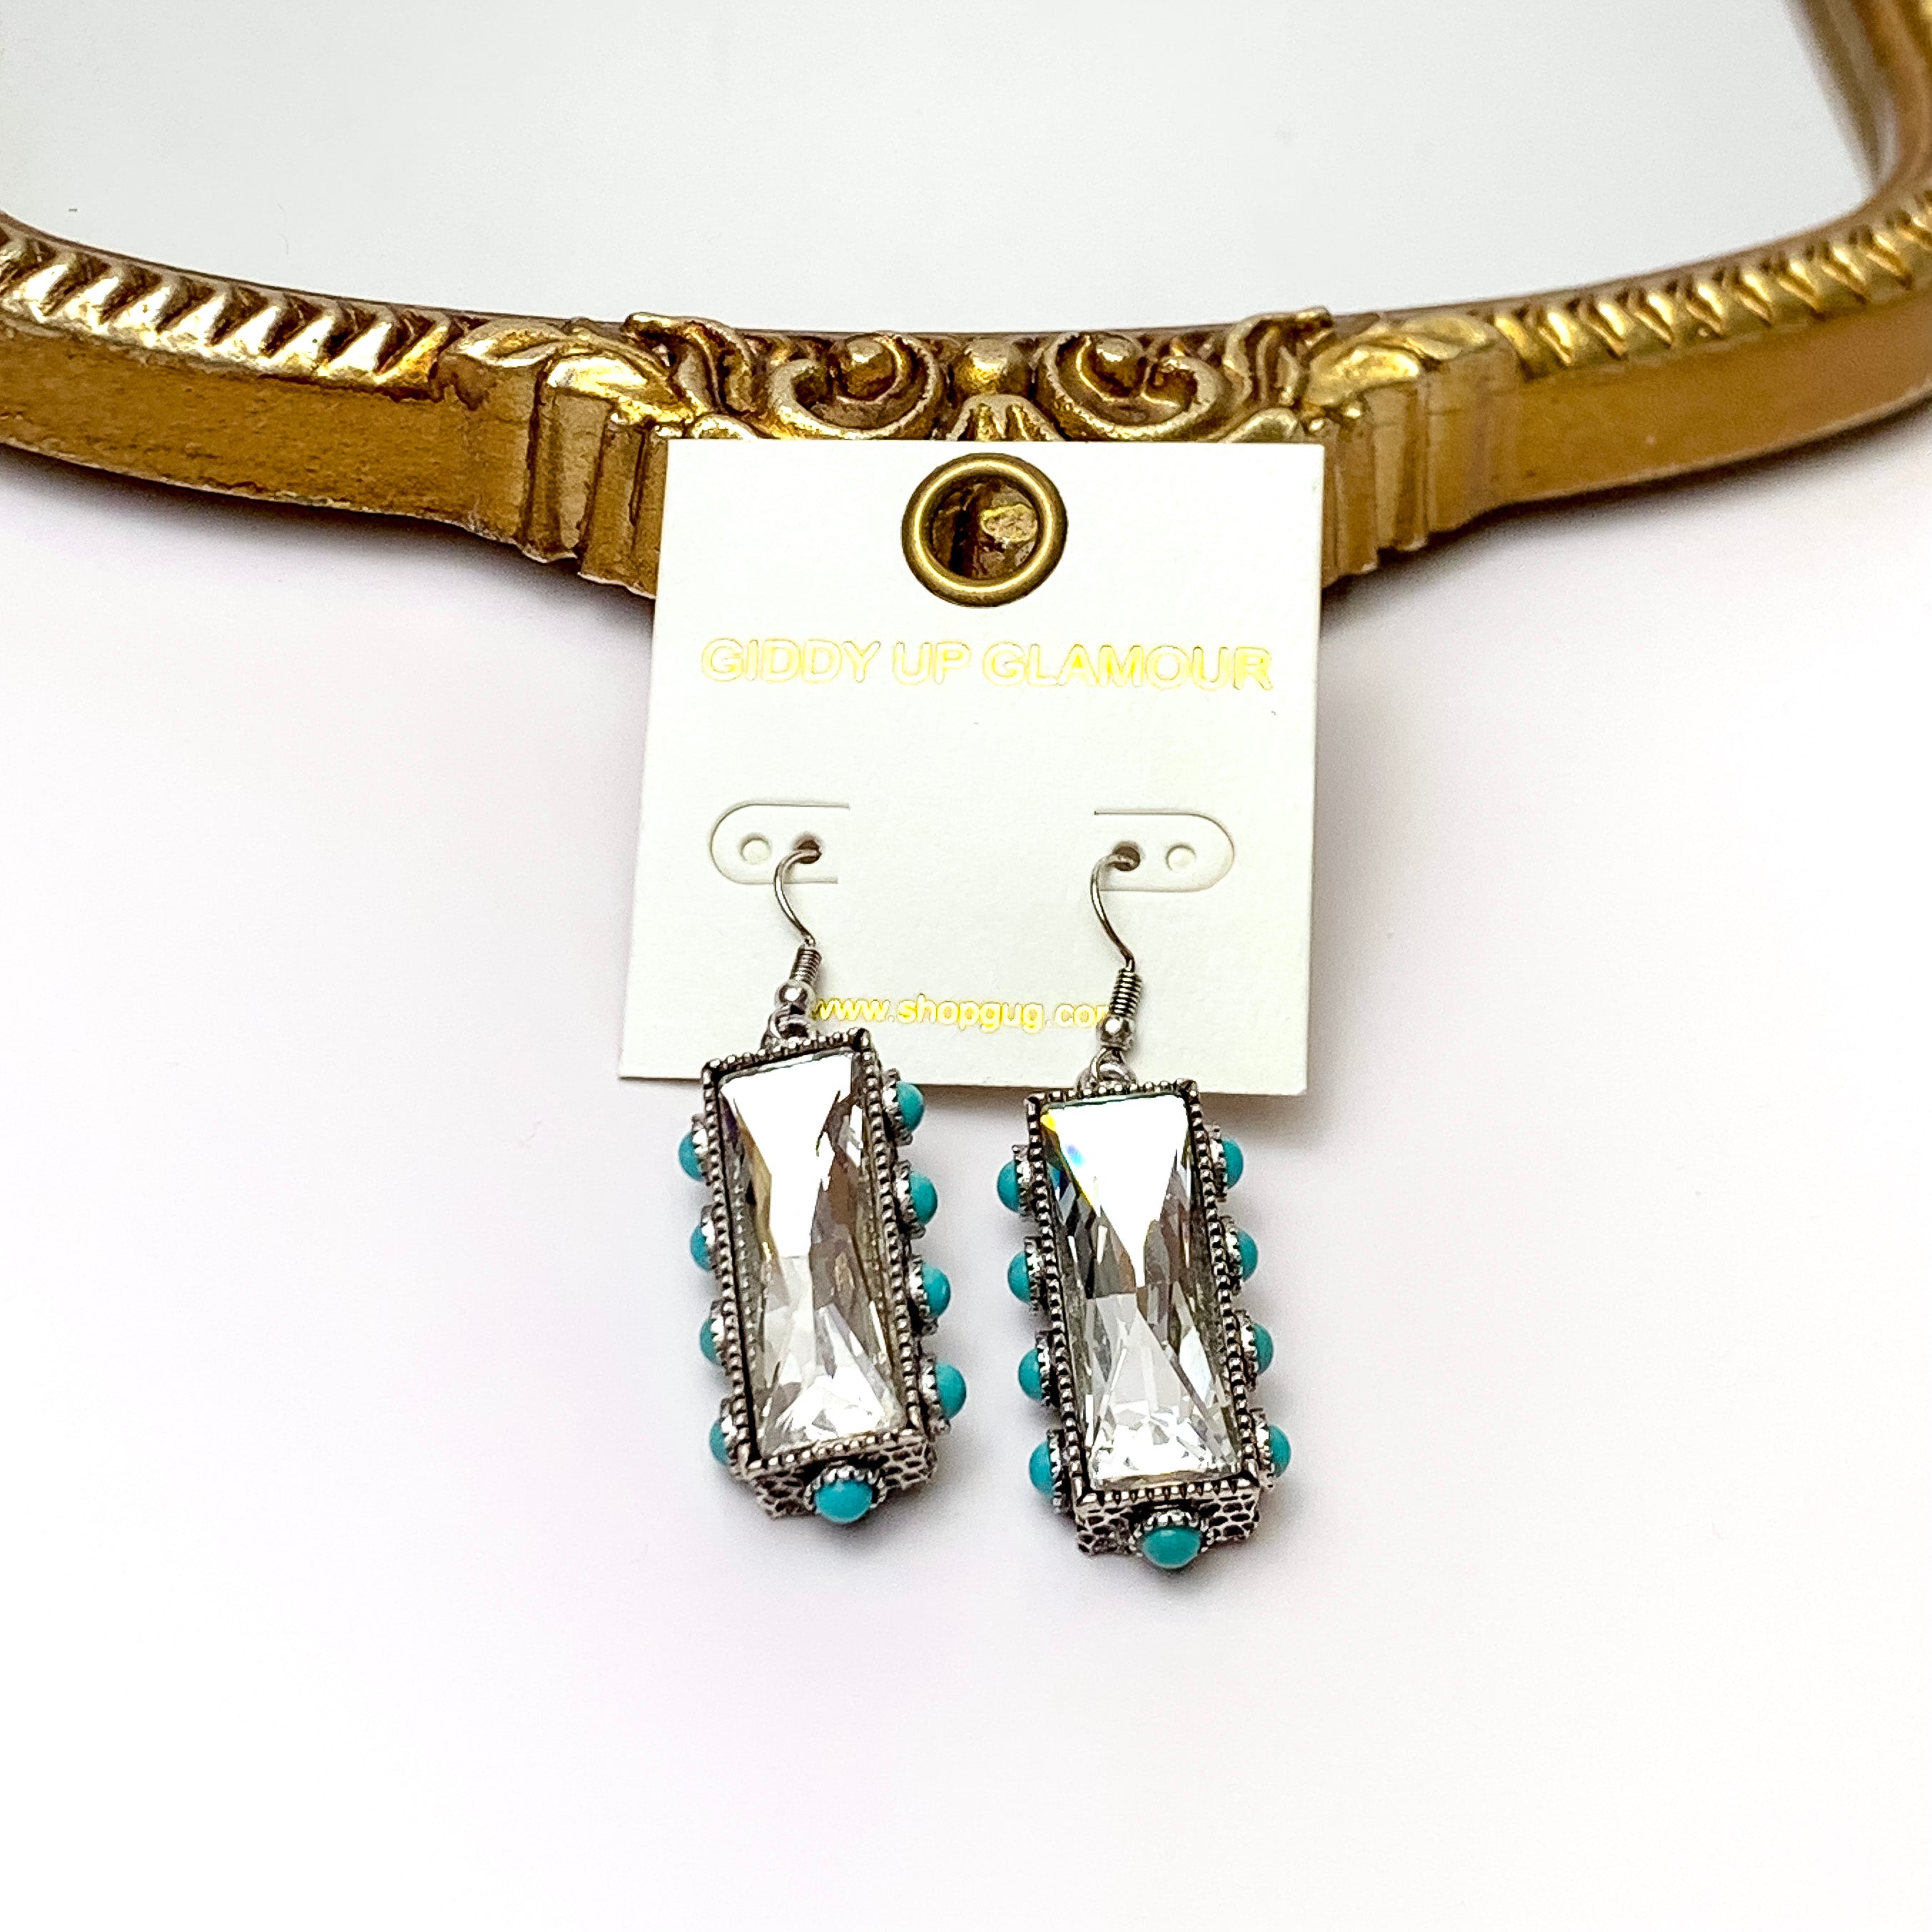 Clear Crystal Bar Drop Earrings with Faux Turquoise Border Accents - Giddy Up Glamour Boutique